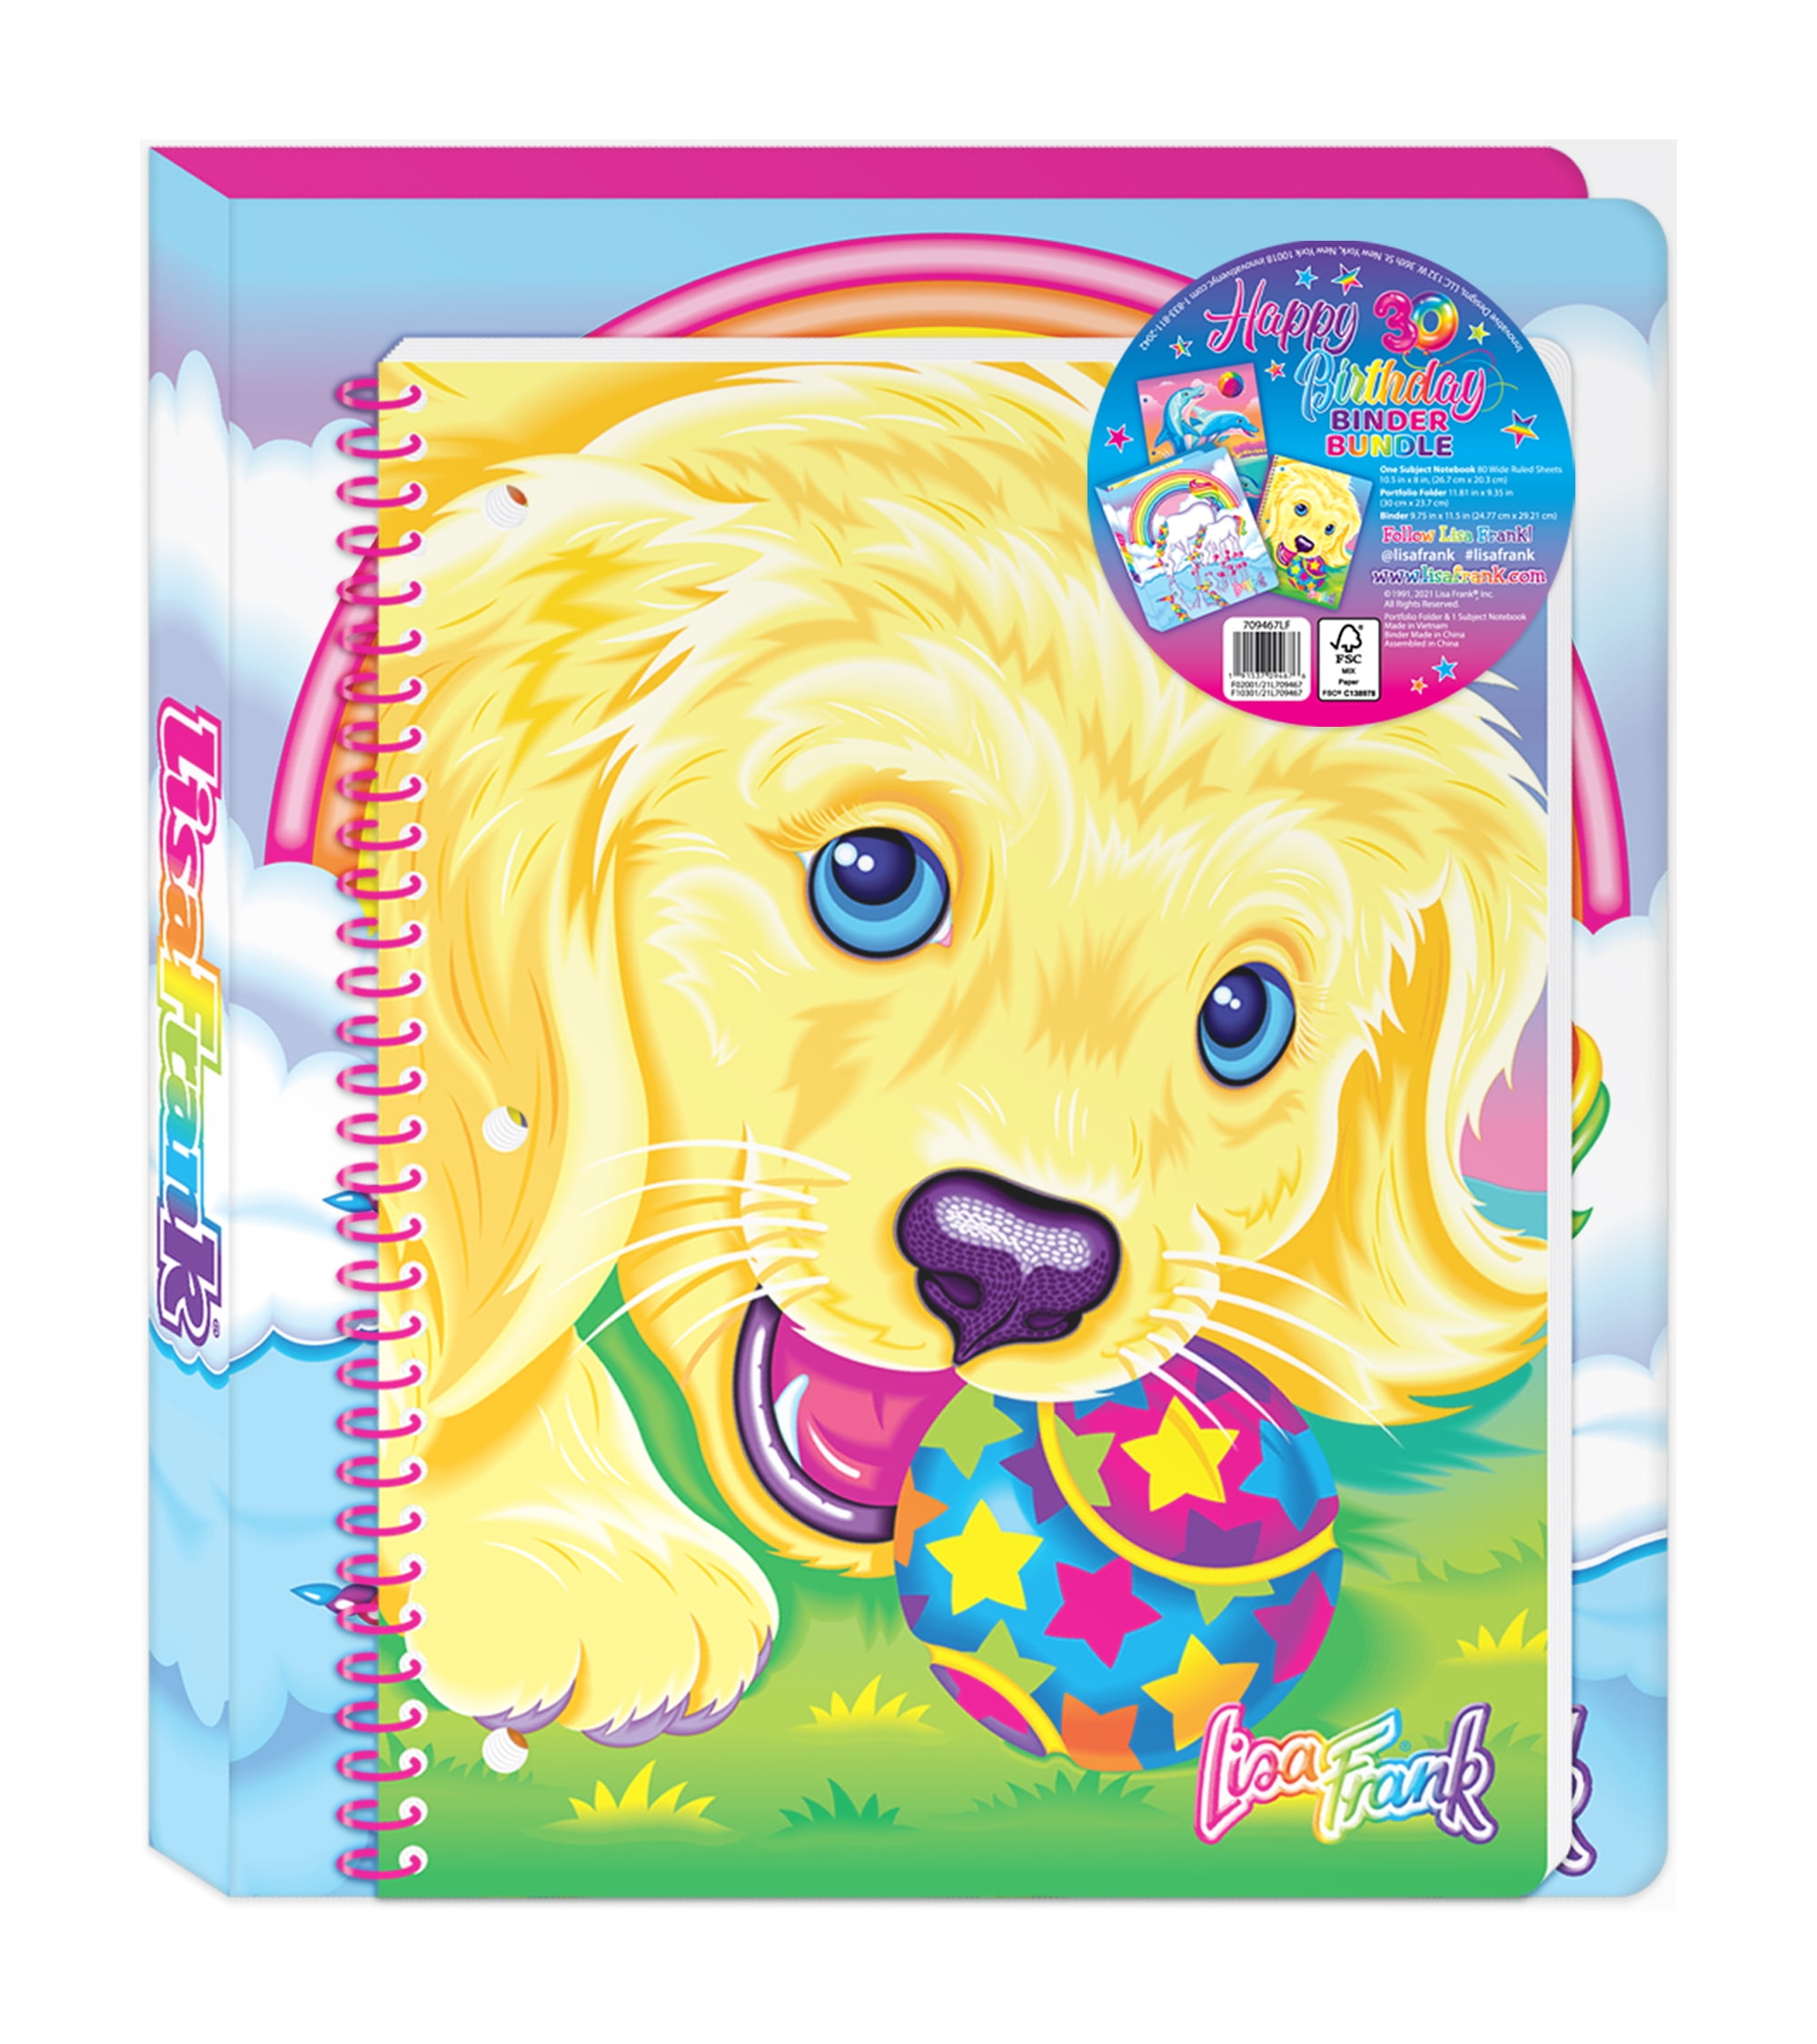 food and girls solid 31 stickers. bfl LisaFrank bright colored fun animal 